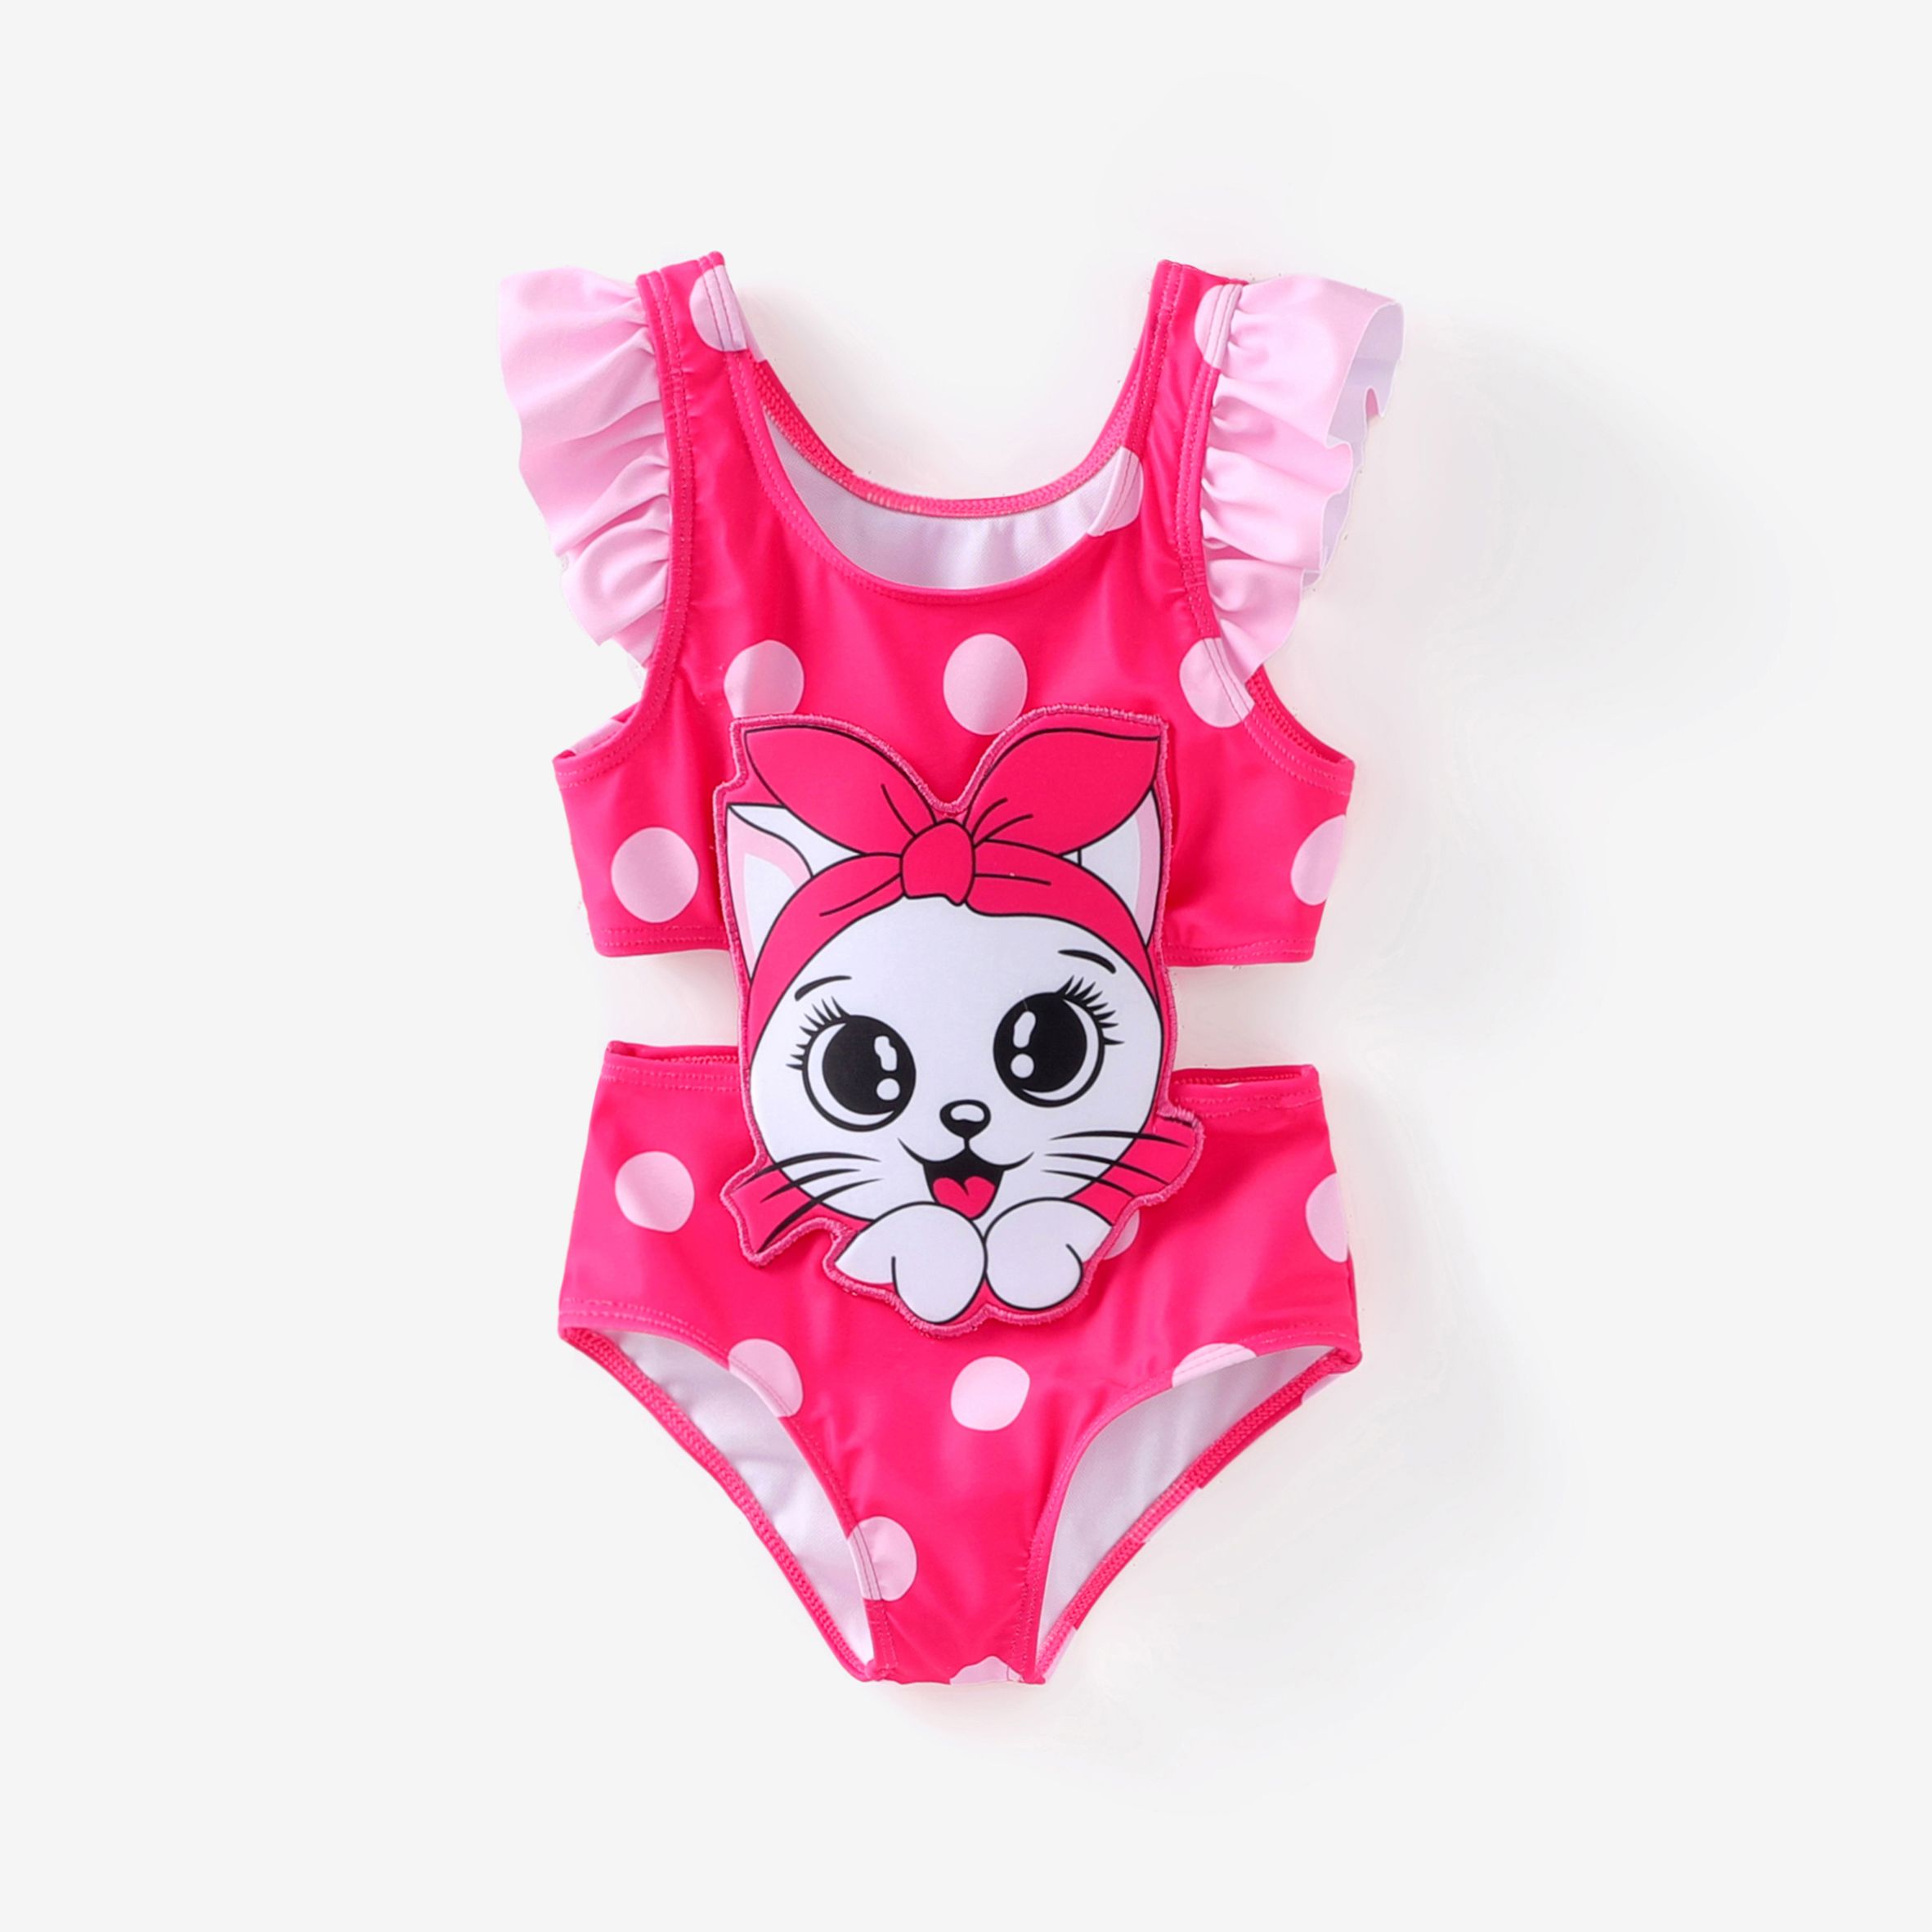 Toddler Girl Cat/Flamingo Applique Polka Dots Print Ruffled One-Piece Swimsuit